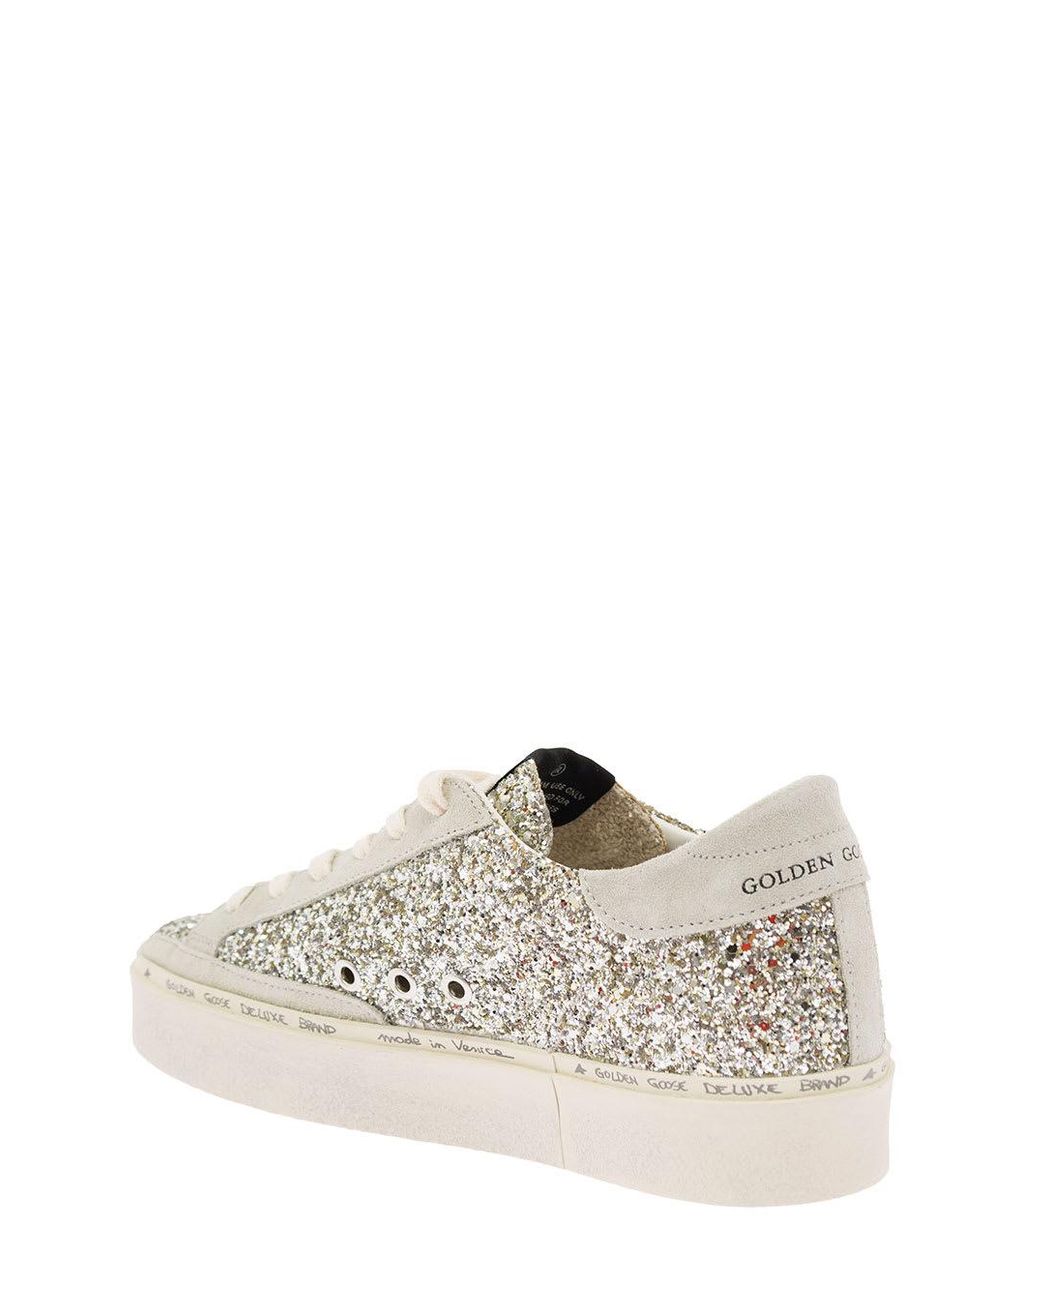 Golden Goose Woman's Hi Star Glittered Leather Sneakers | Lyst